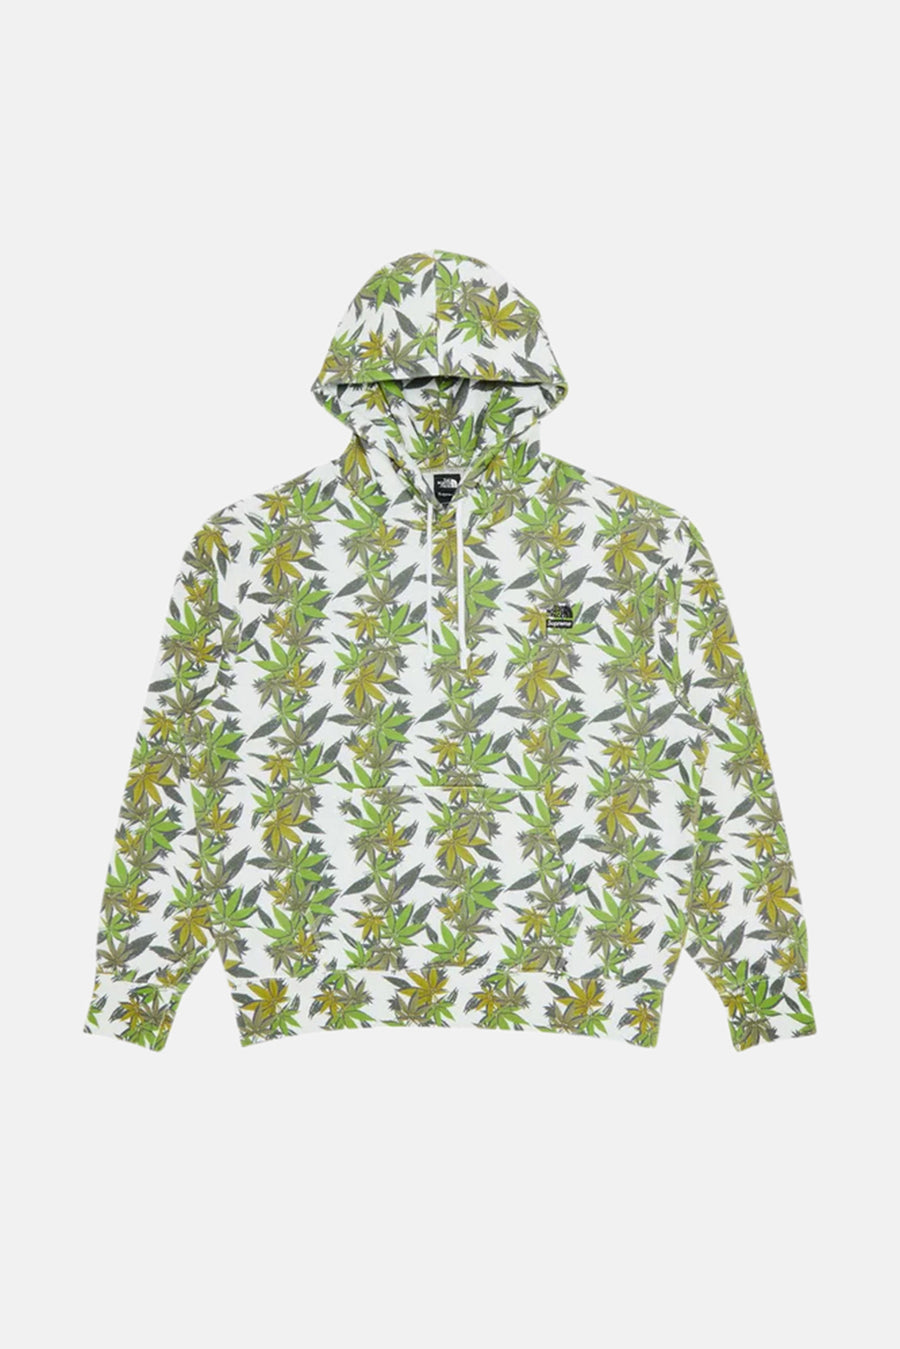 Supreme The North Face Leaf Hooded Sweatshirt White